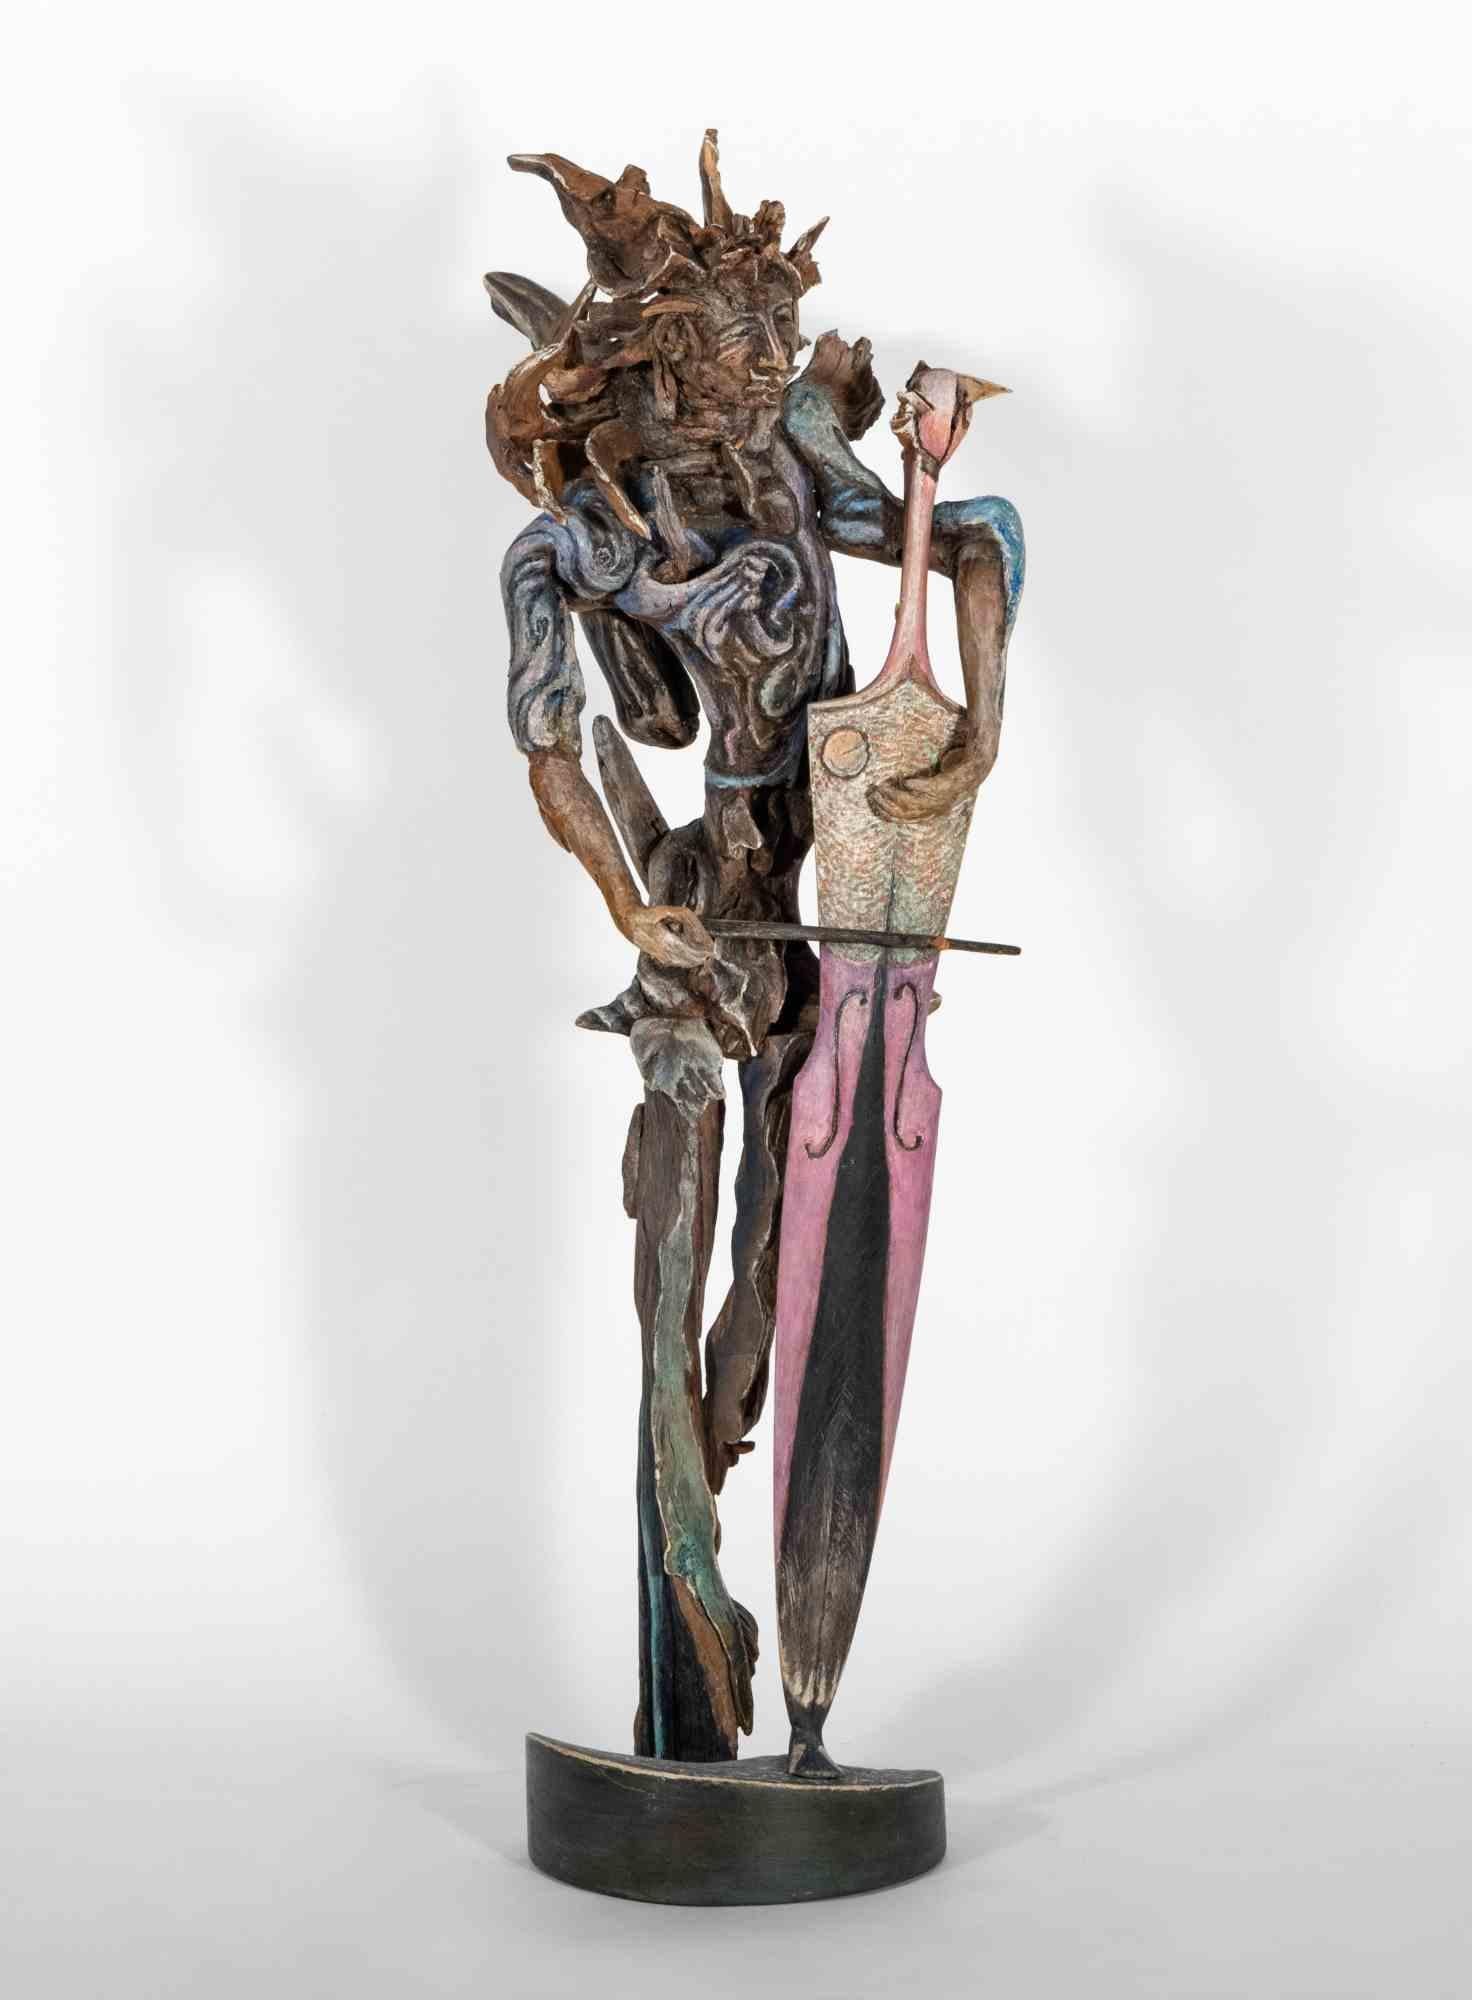 Evocative Sculpture, in Excellent condition, created in Hand Painted Wood by Sculptor Lorenzo Servalli to narrate, in the year 1998, the Evocation of Inspiration.  As a solitary Musician who gives Life to a colorful and mighty Symphony, symbolized